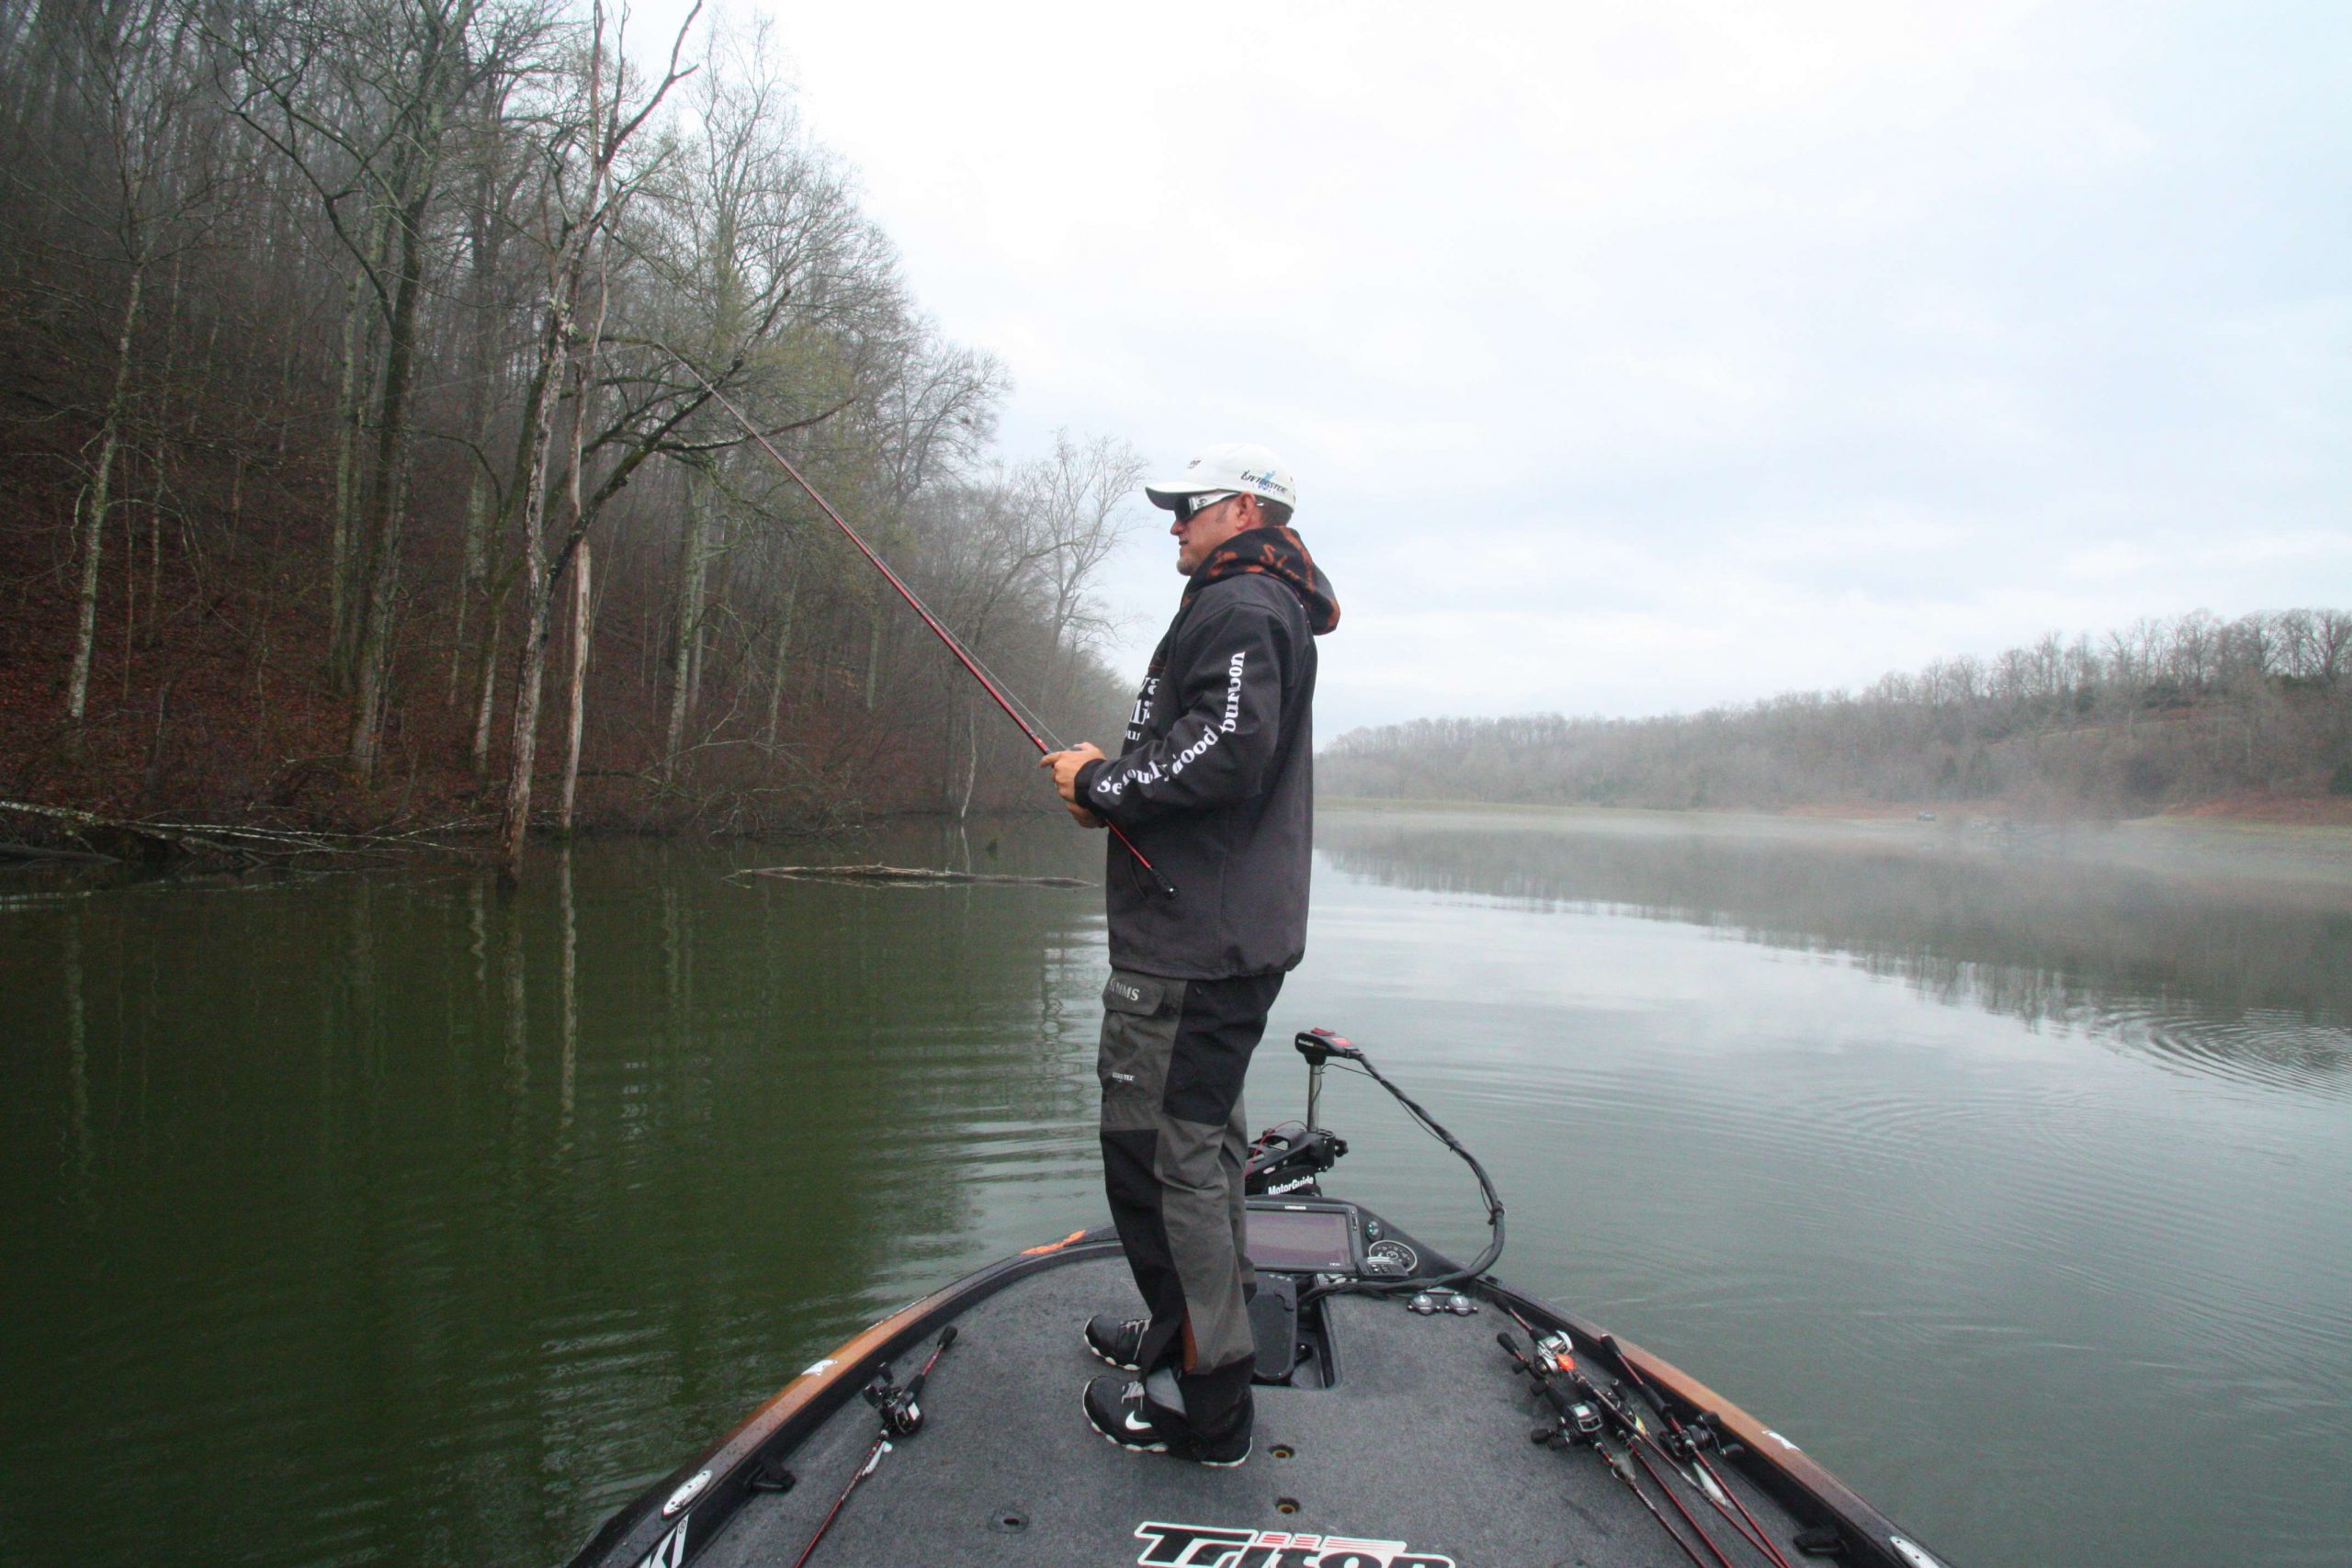 8:38 a.m. As Lake H begins to fog over, Cherry moves to a deep channel bank lined with laydown and standing timber.